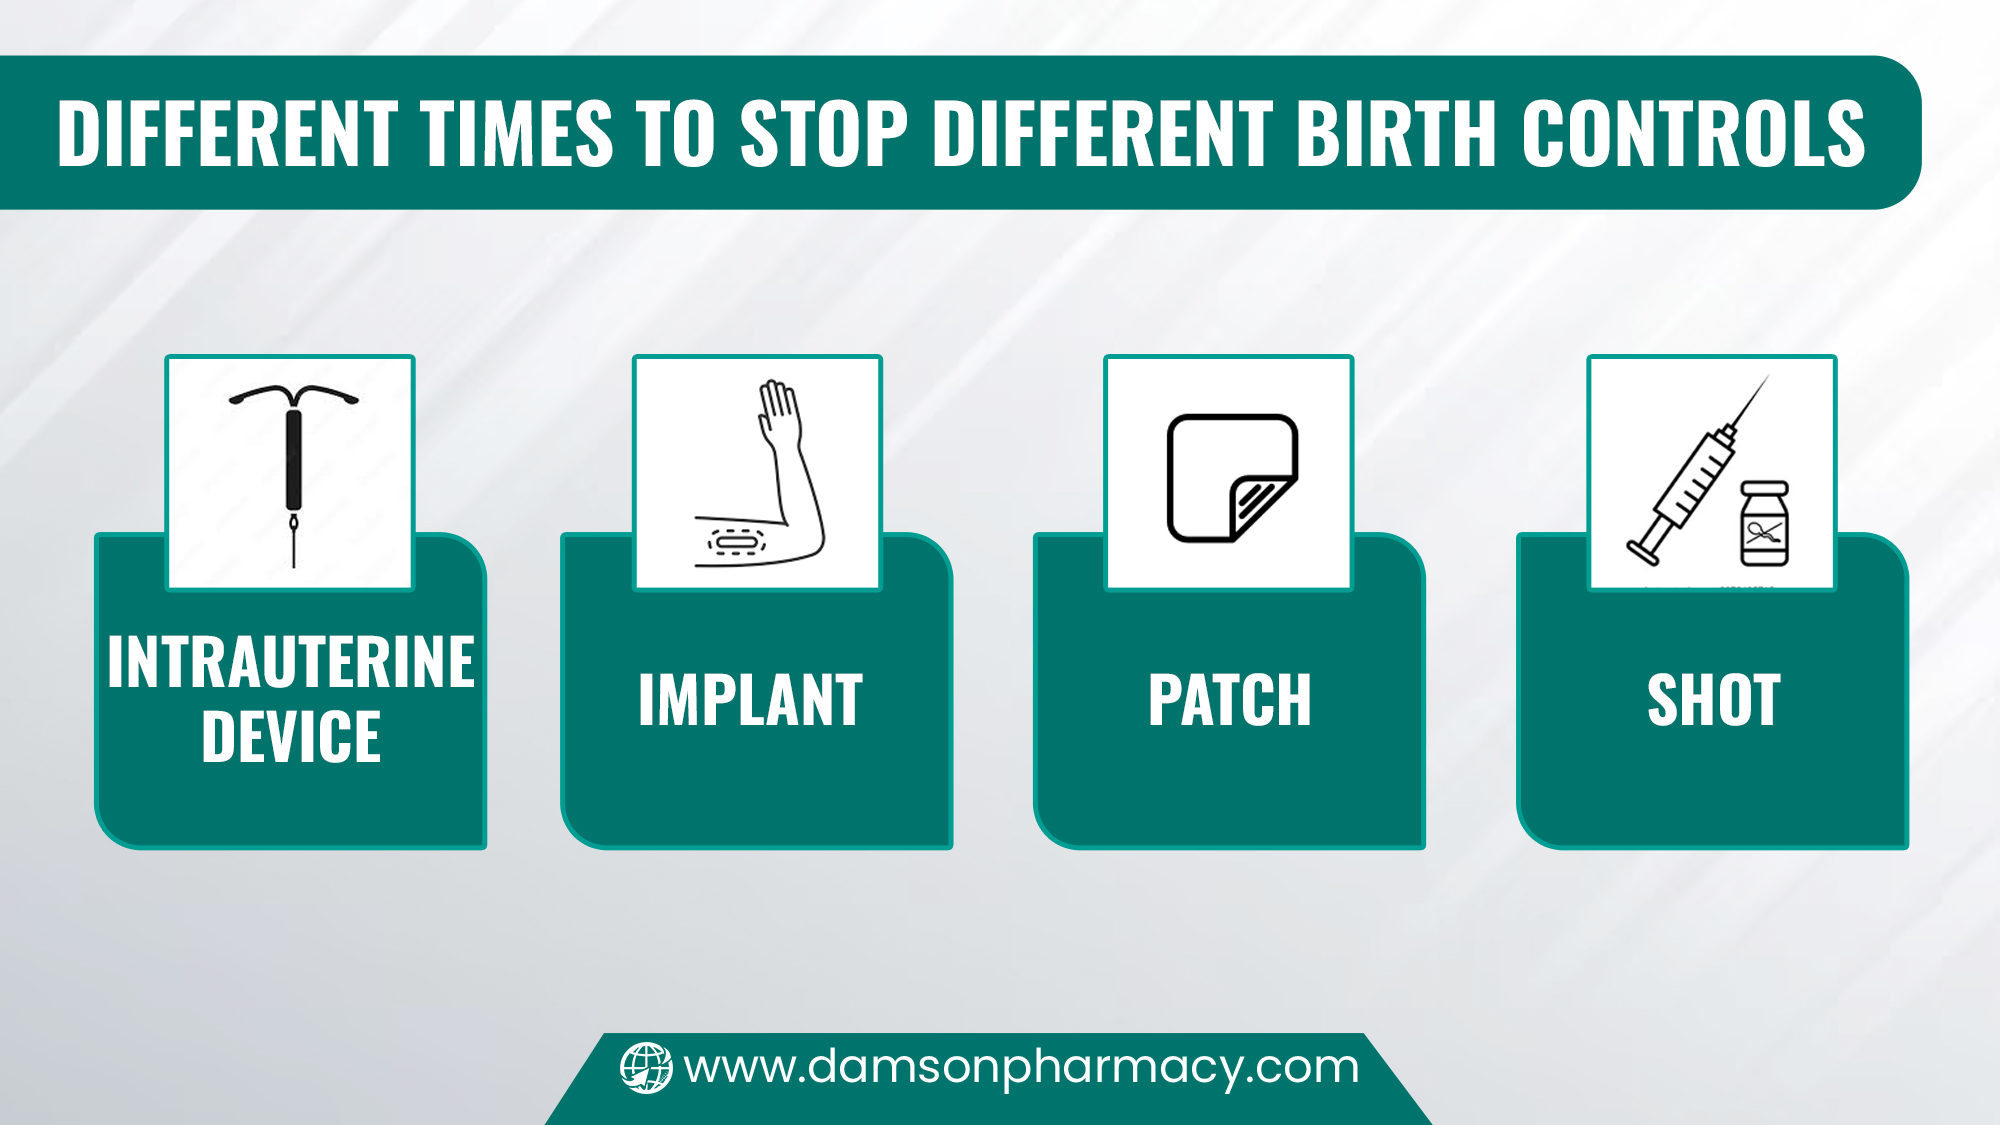 Different Times to Stop Different Birth Controls